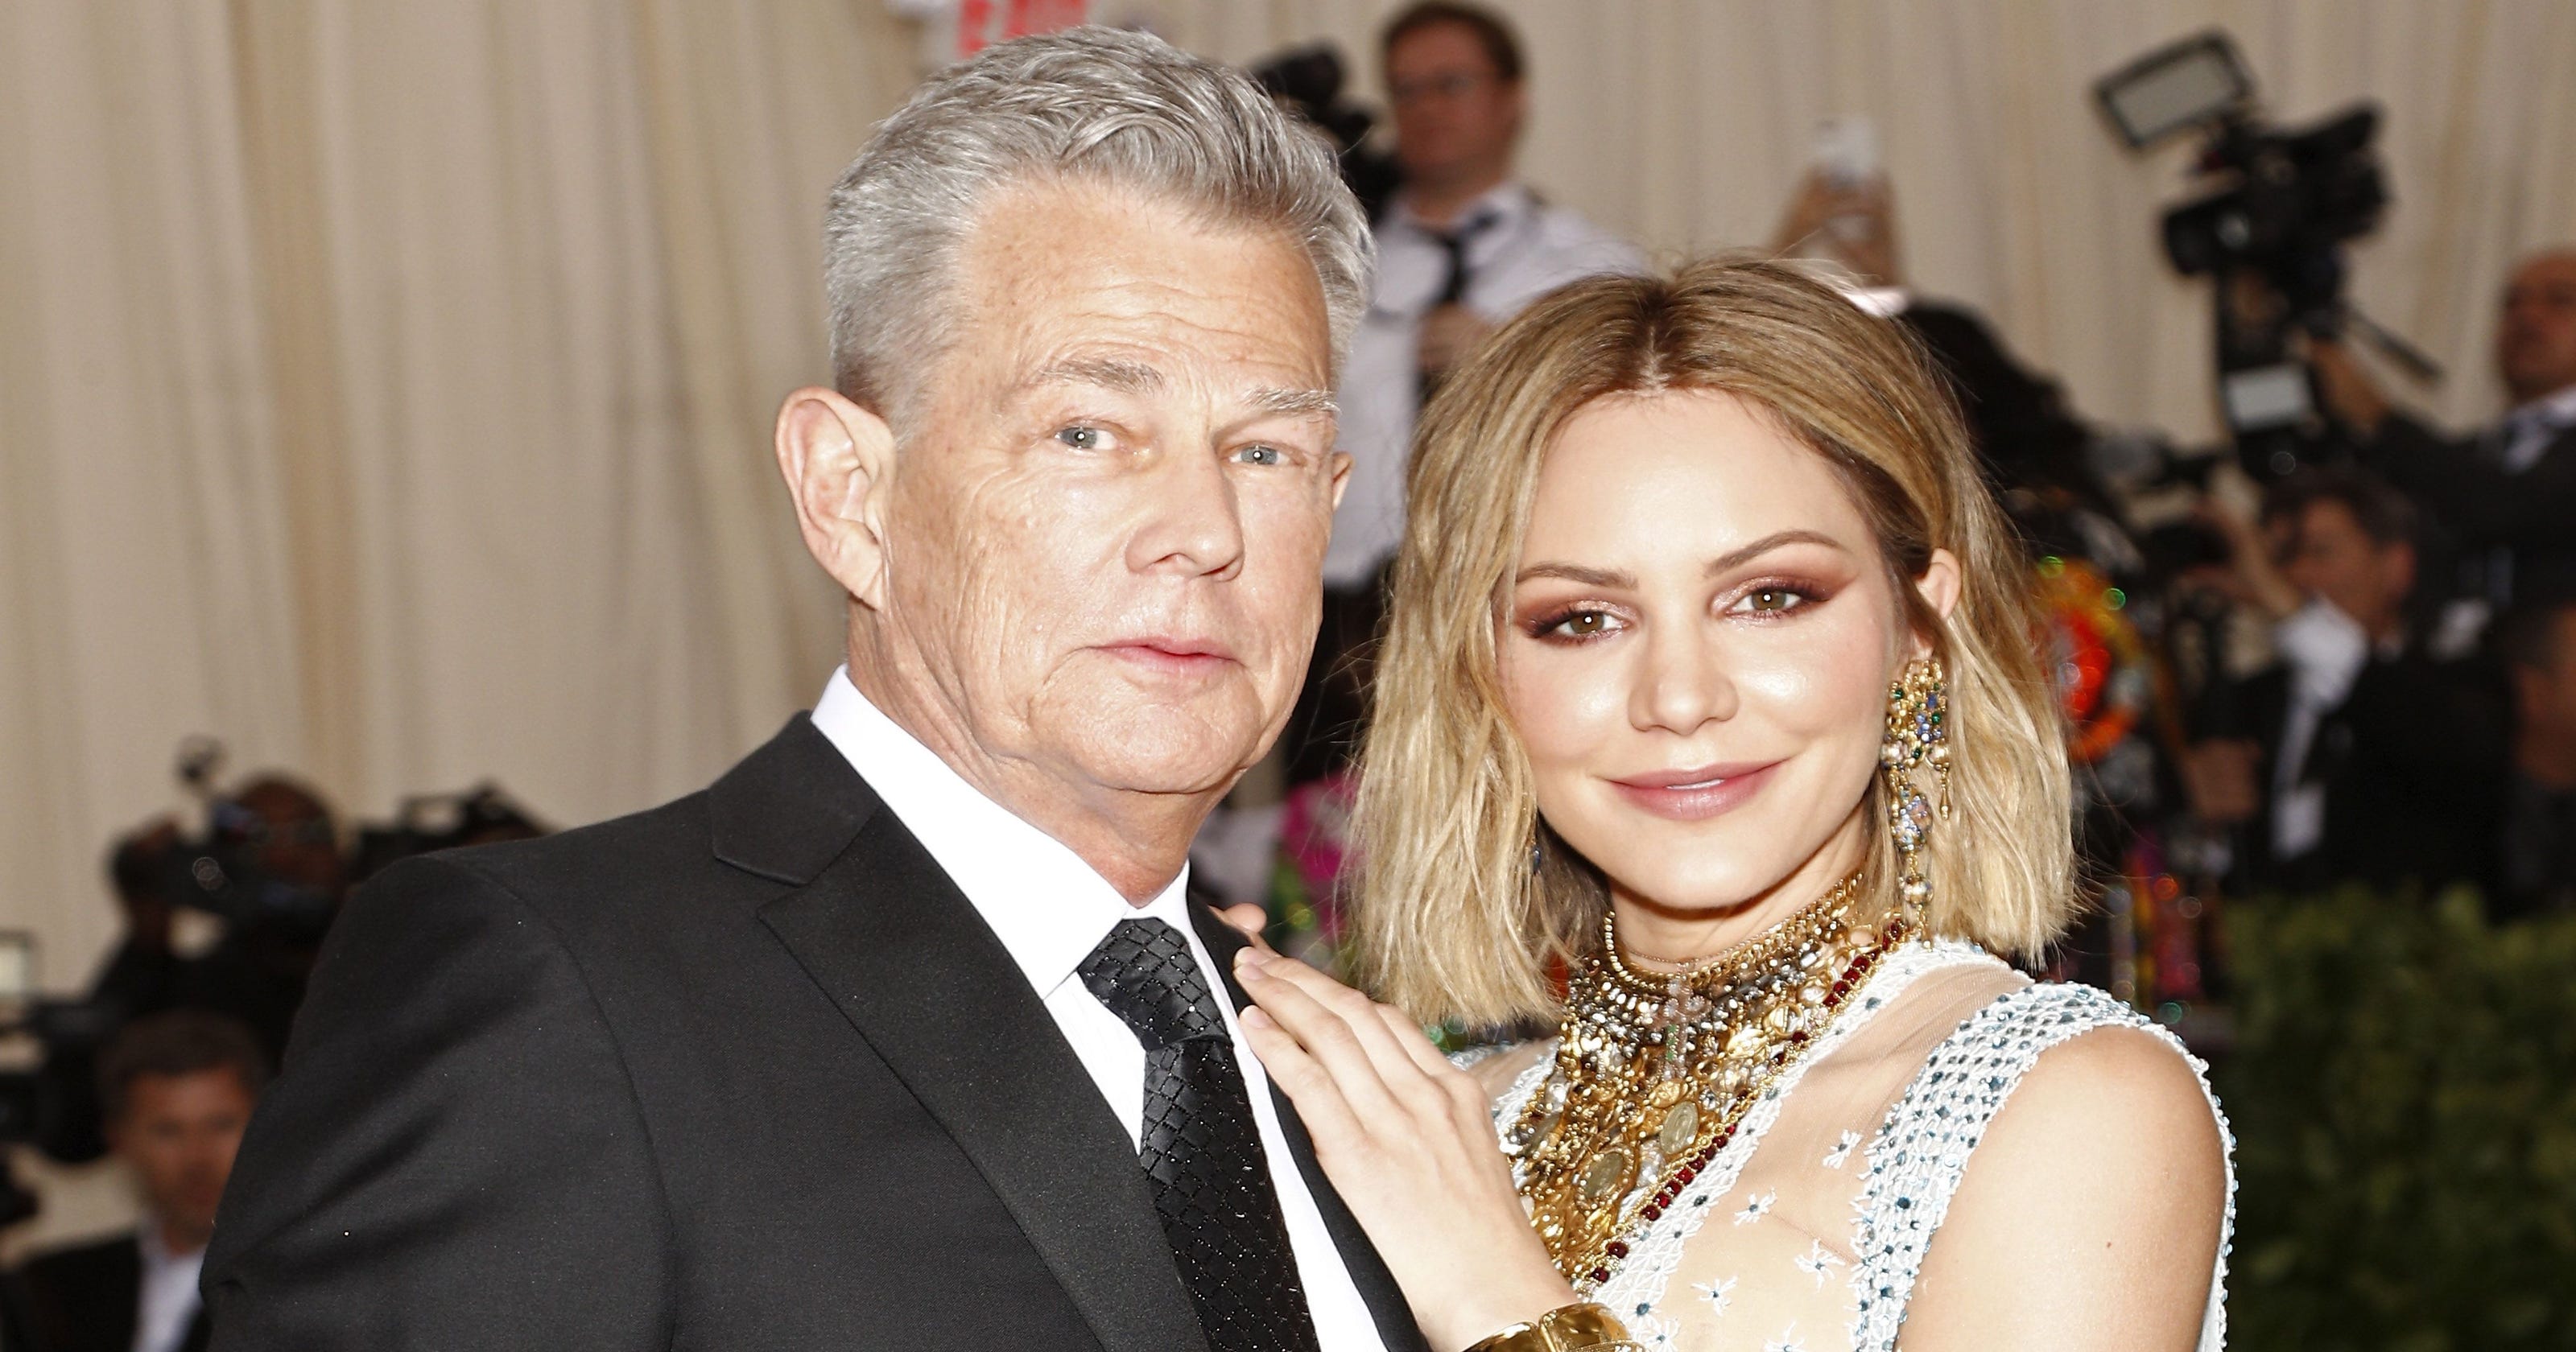 Katharine McPhee and David Foster are engaged